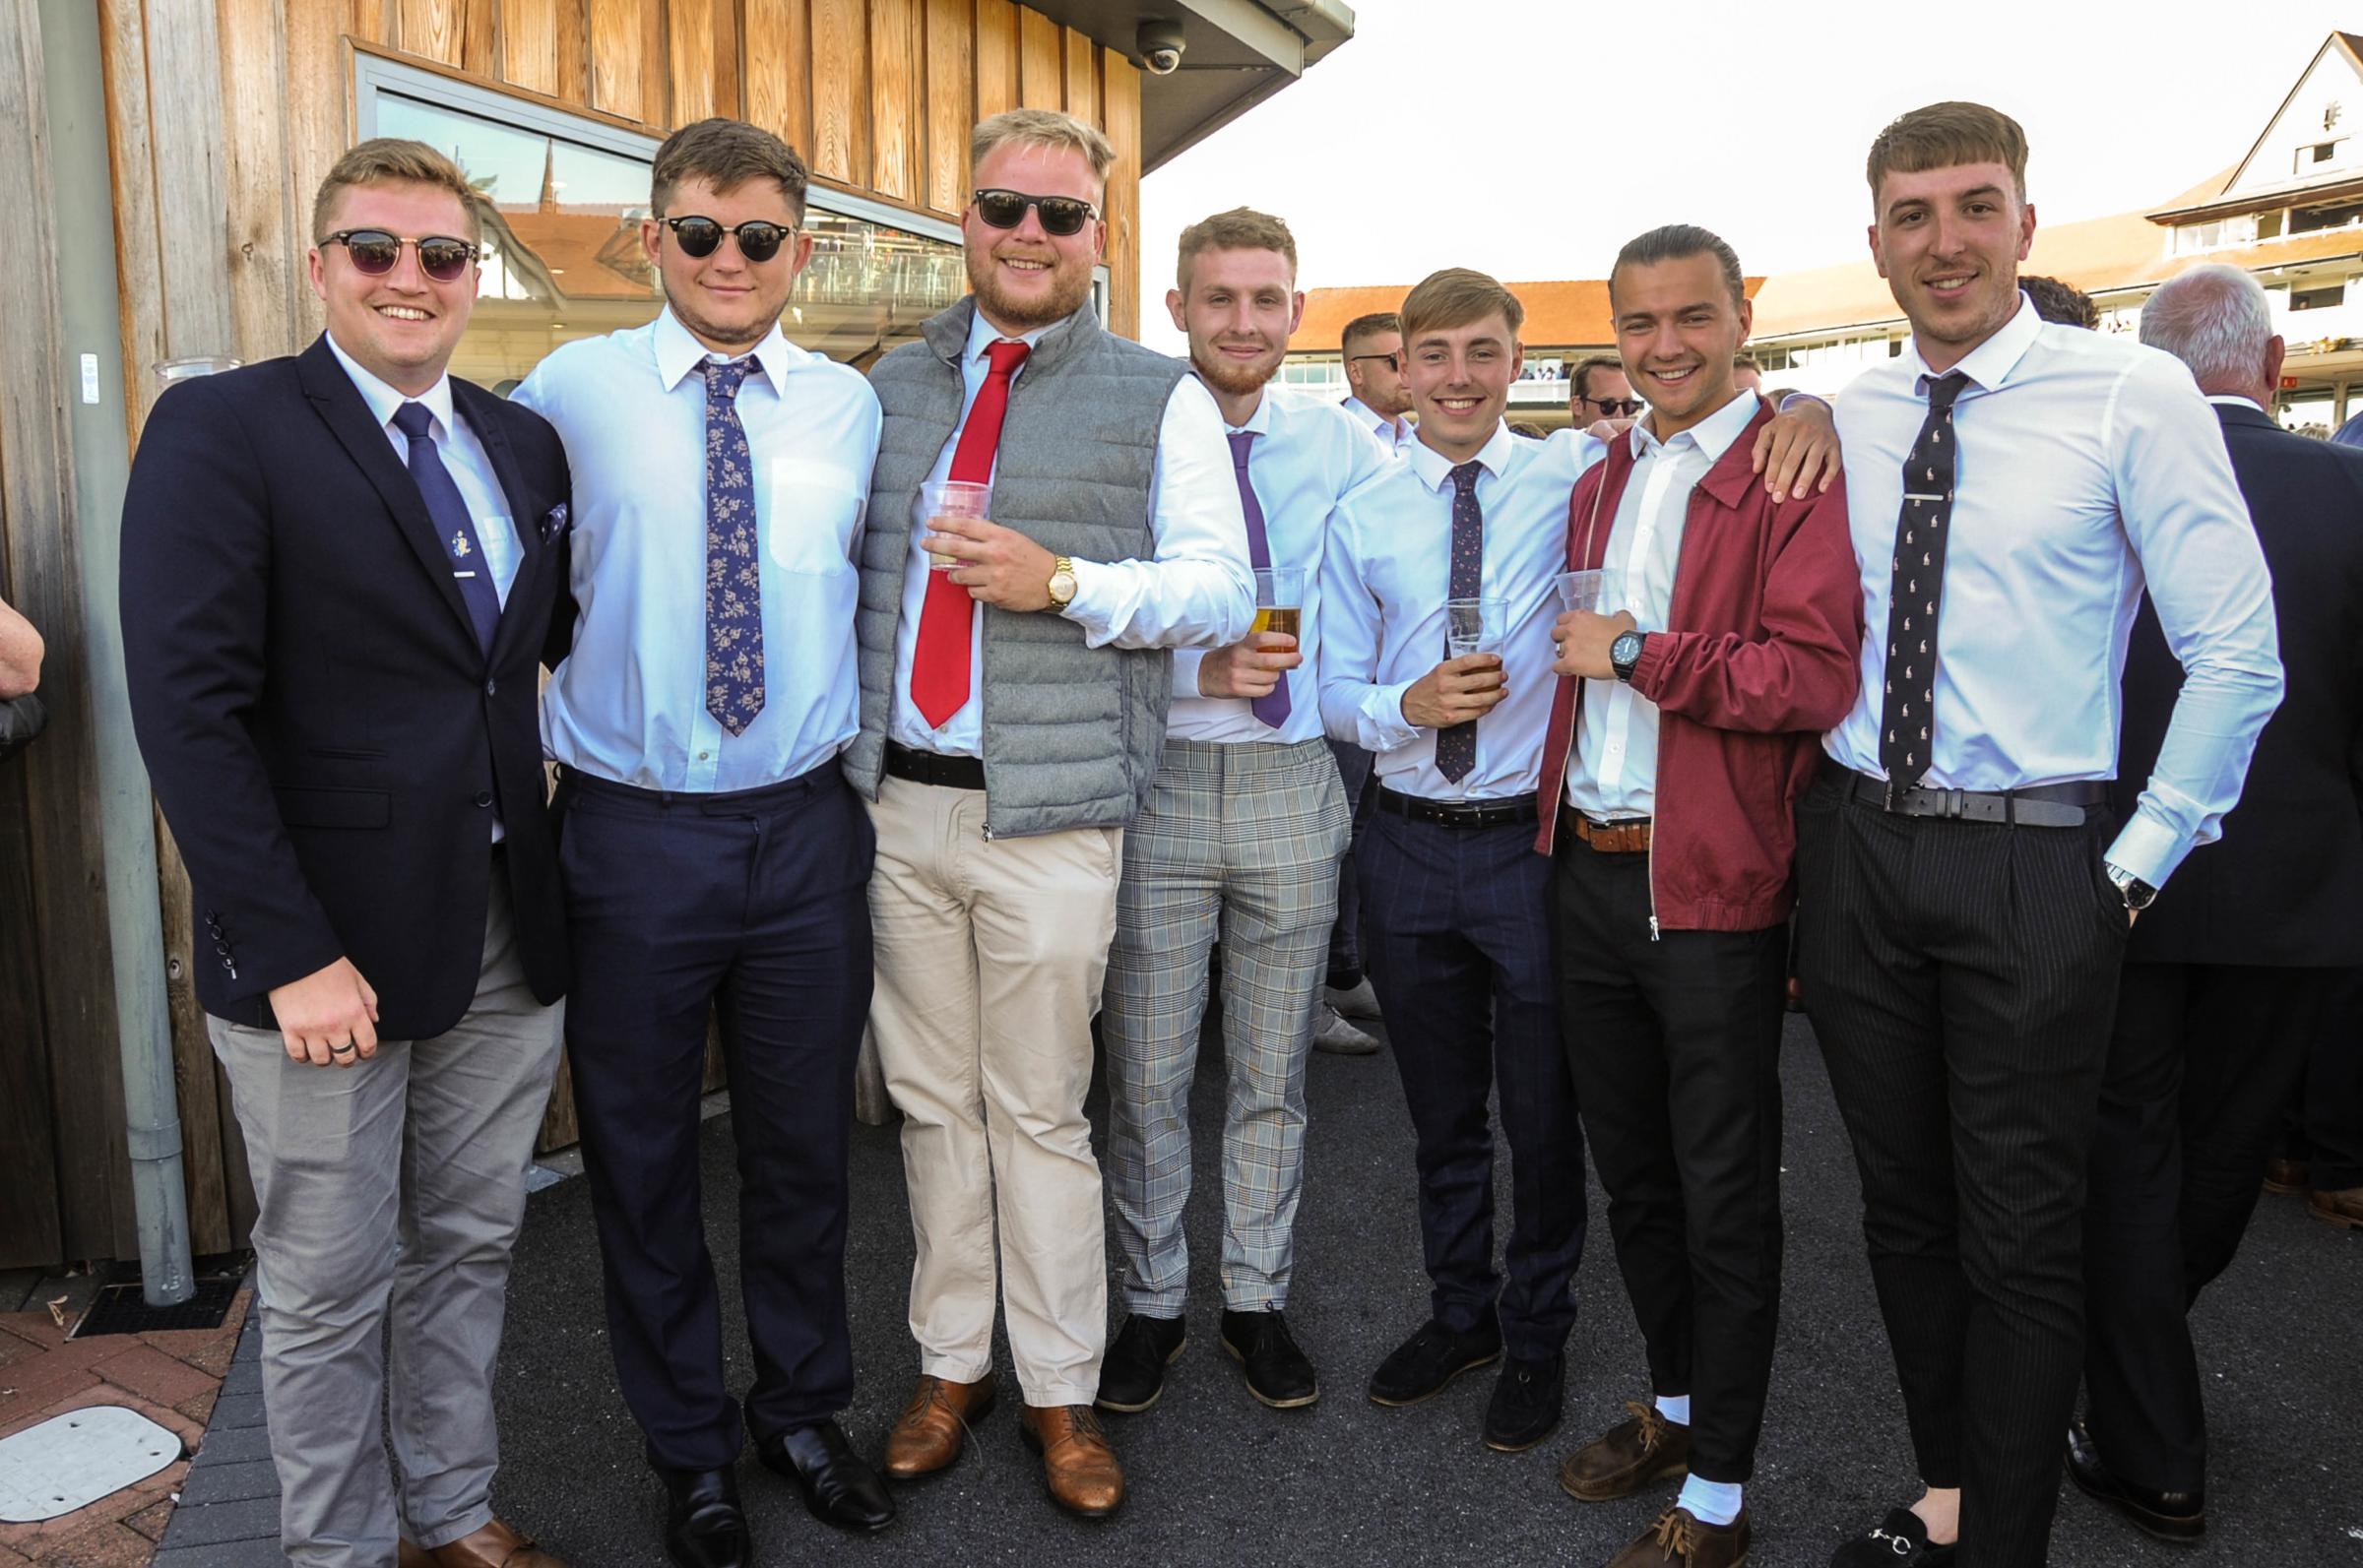 Chester Racecourse, Ladies & Gents Evening. On a boys night out are Tom Farrett, centre, with friends. 